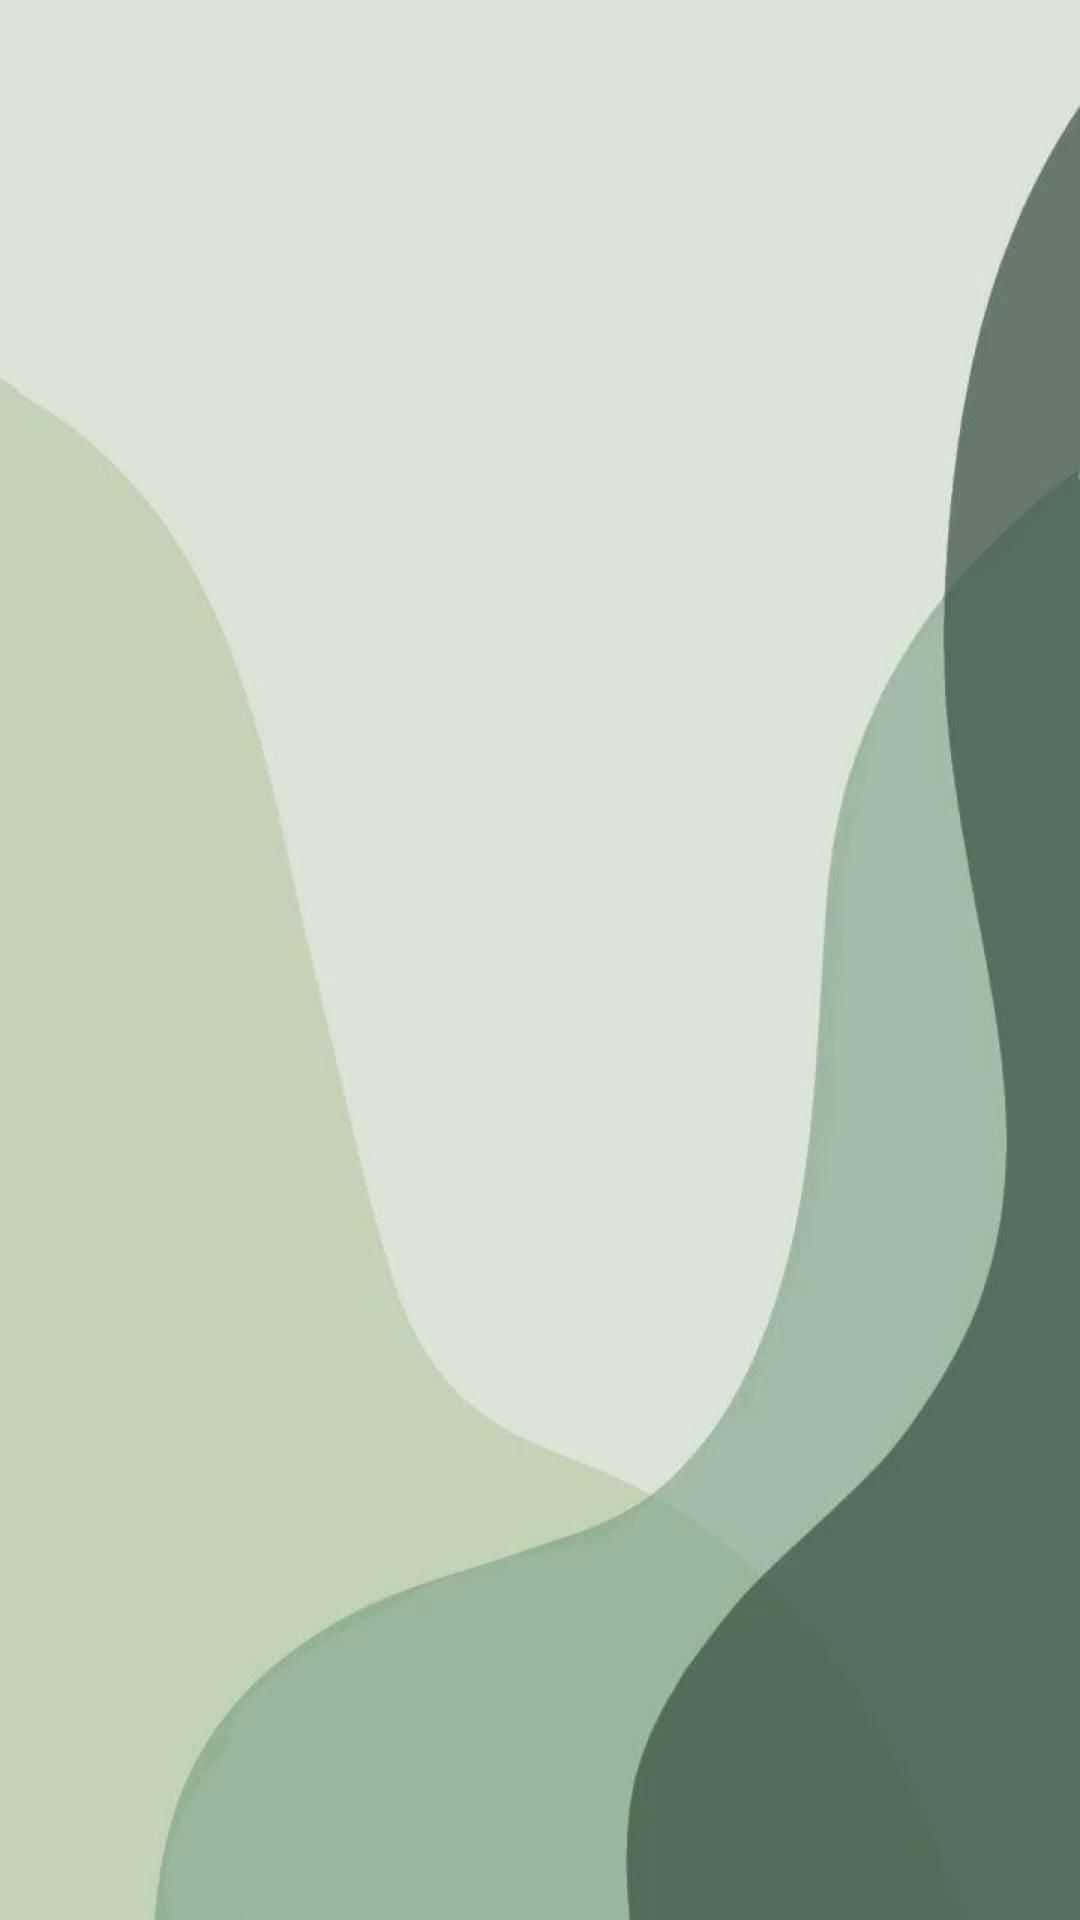 100+] Cute Sage Green Wallpapers | Wallpapers.com